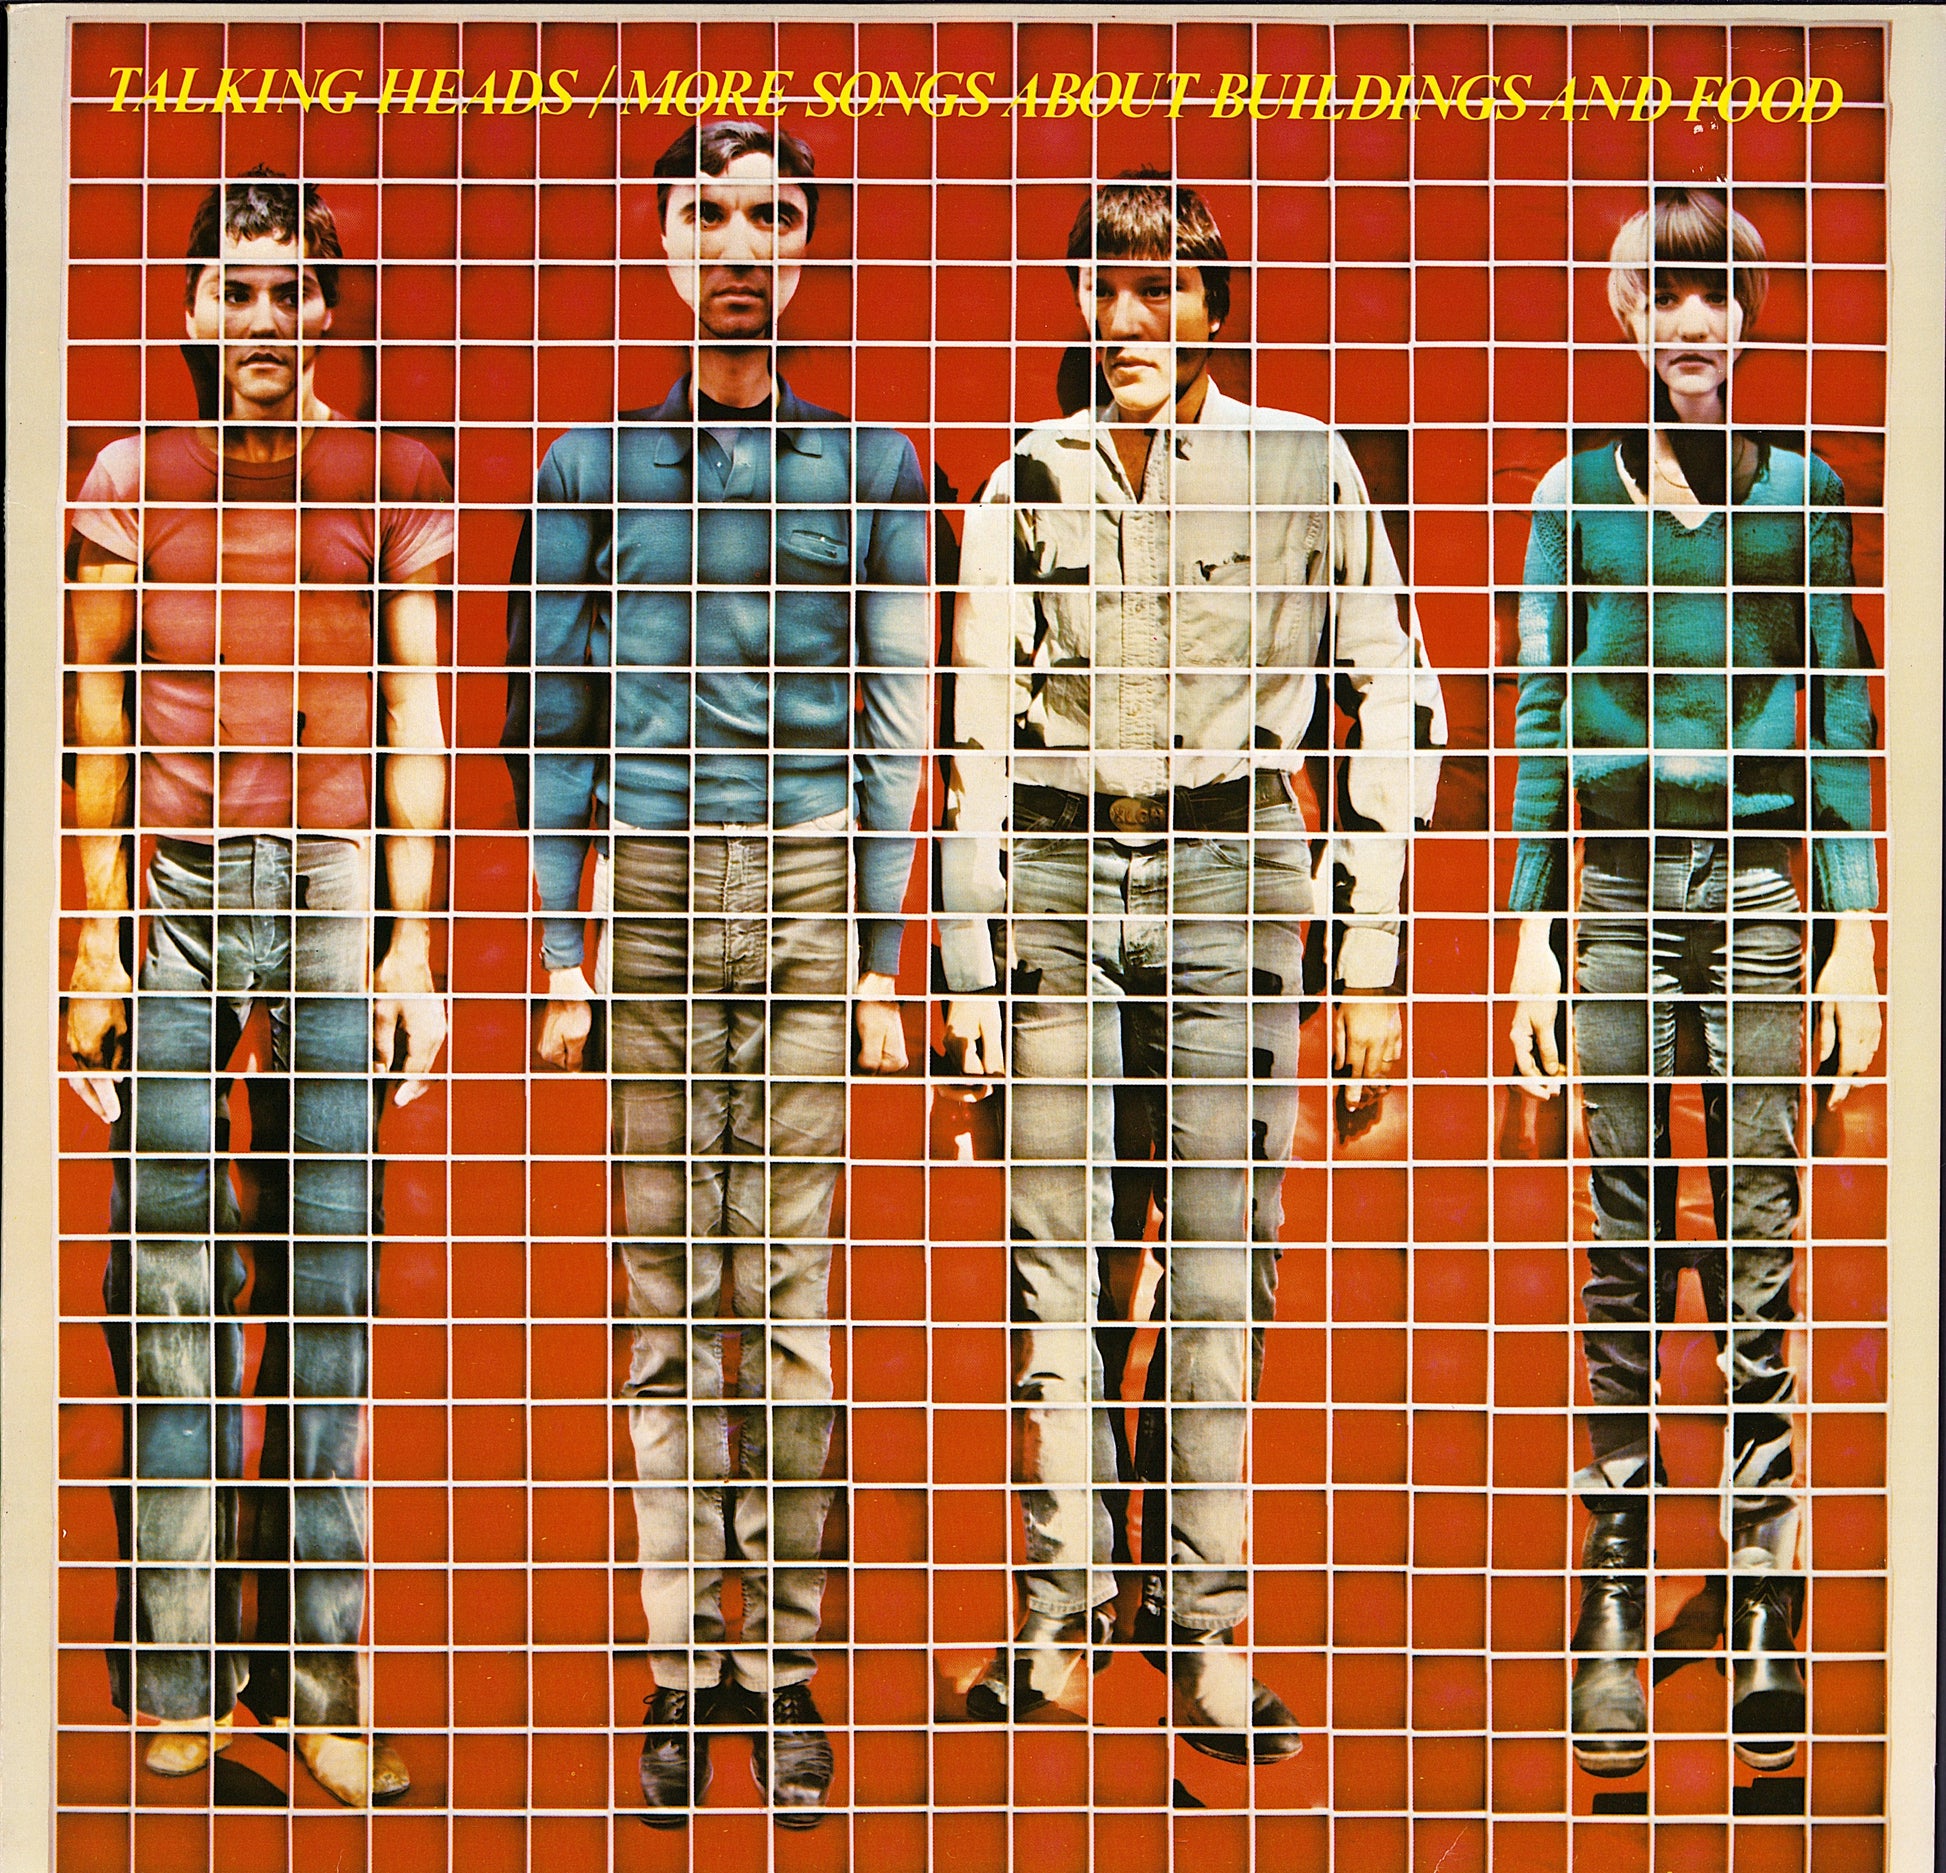 Talking Heads - More Songs About Buildings And Food (Vinyl LP) DE